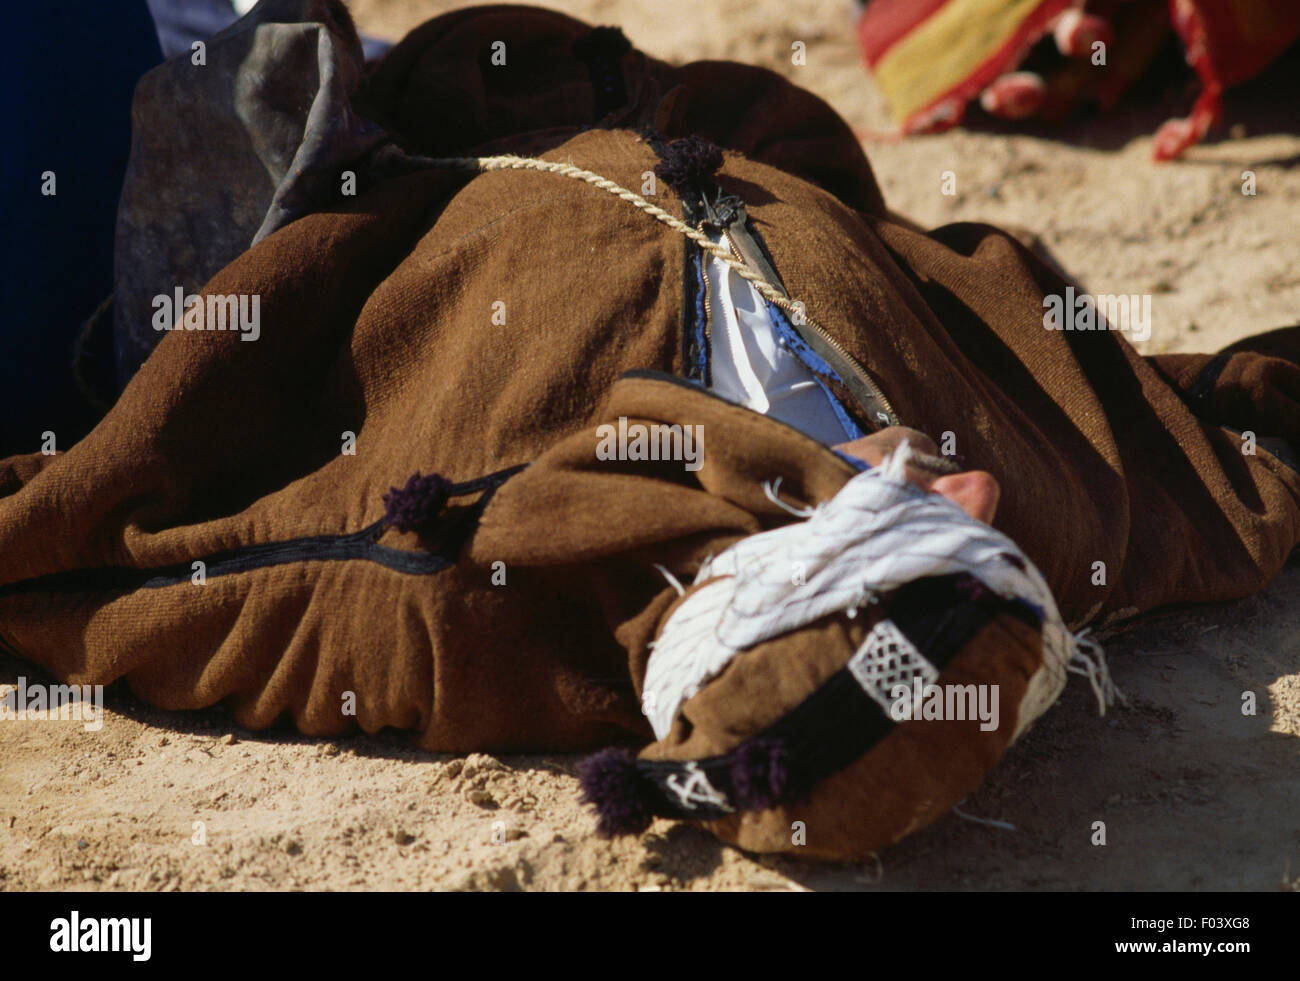 A man in traditional clothes lying on the ground, Matmata Berber festival, Tunisia. Stock Photo